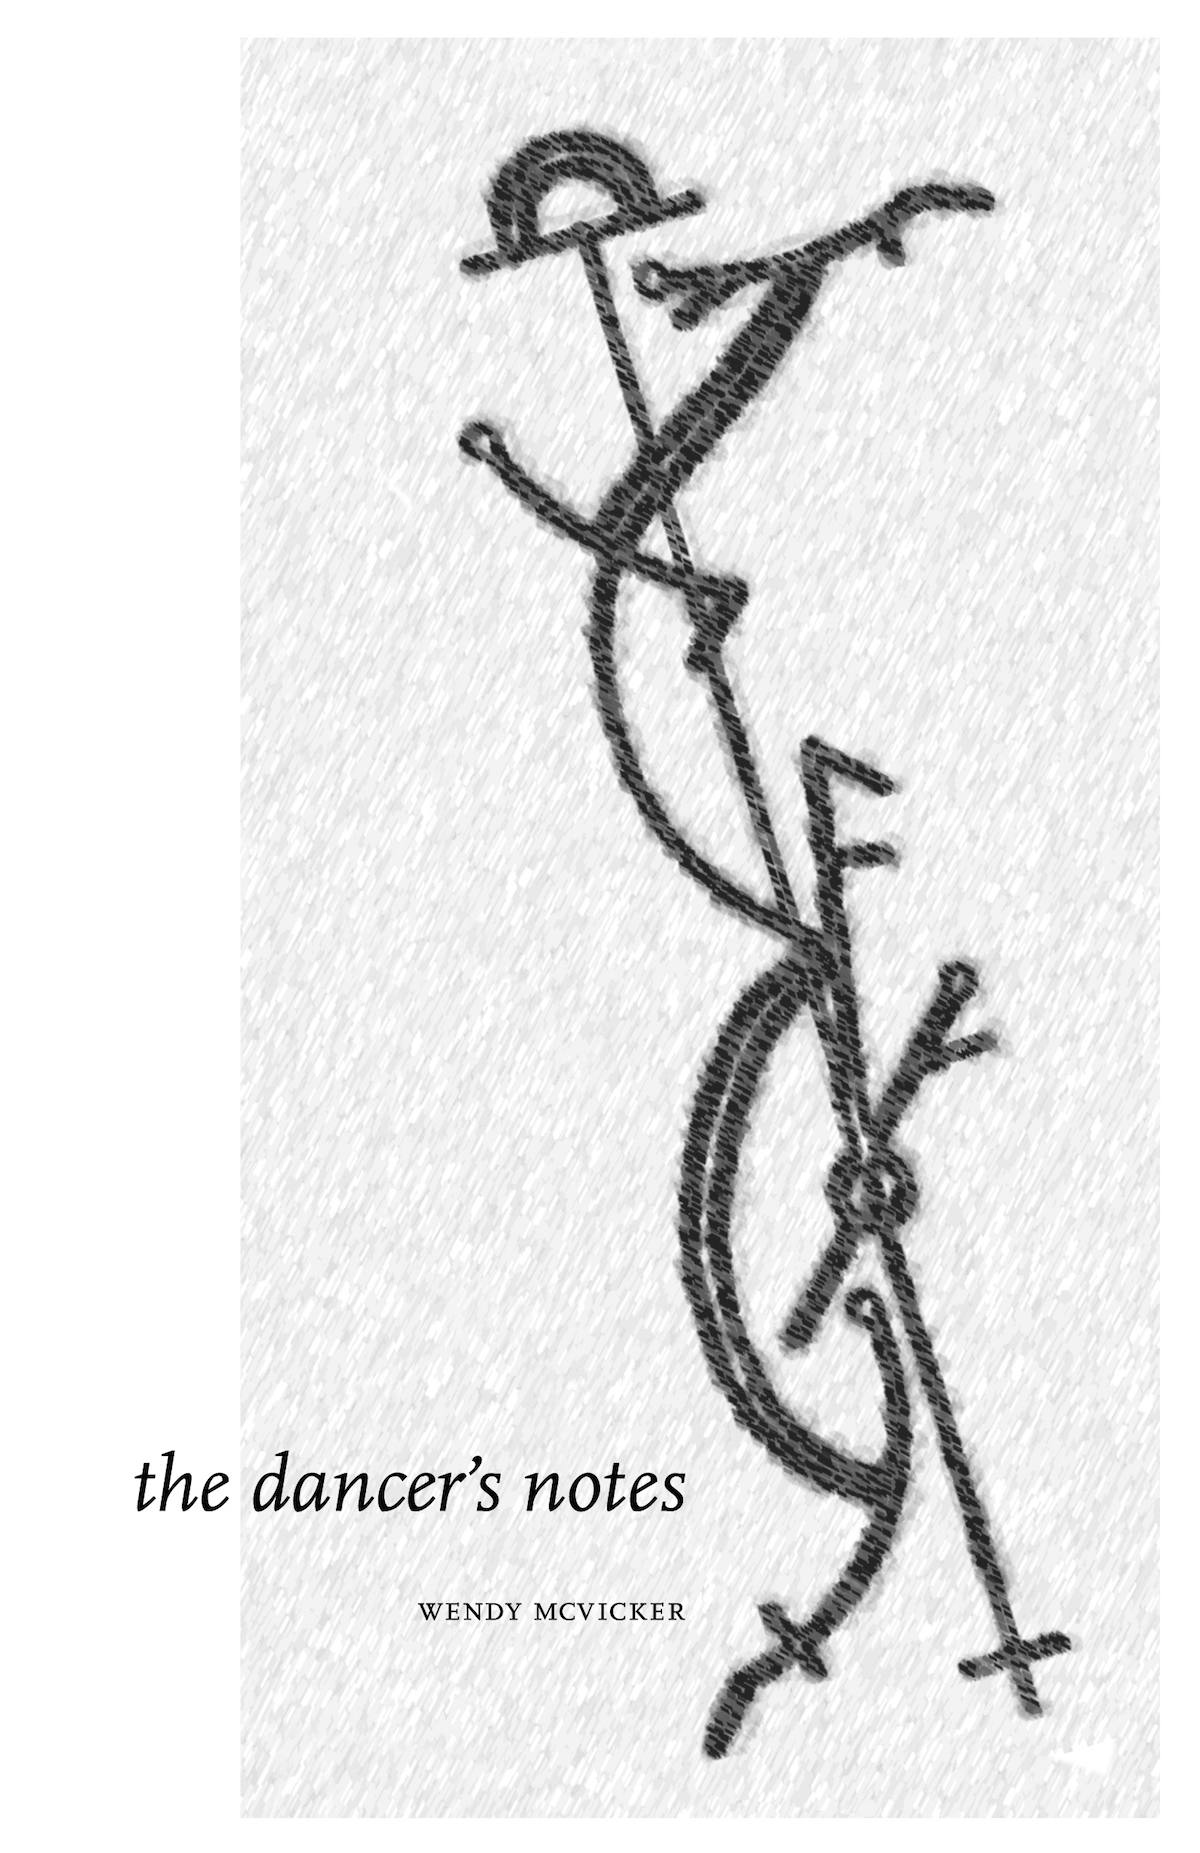 "The Dancer's Notes" by Wendy McVicker